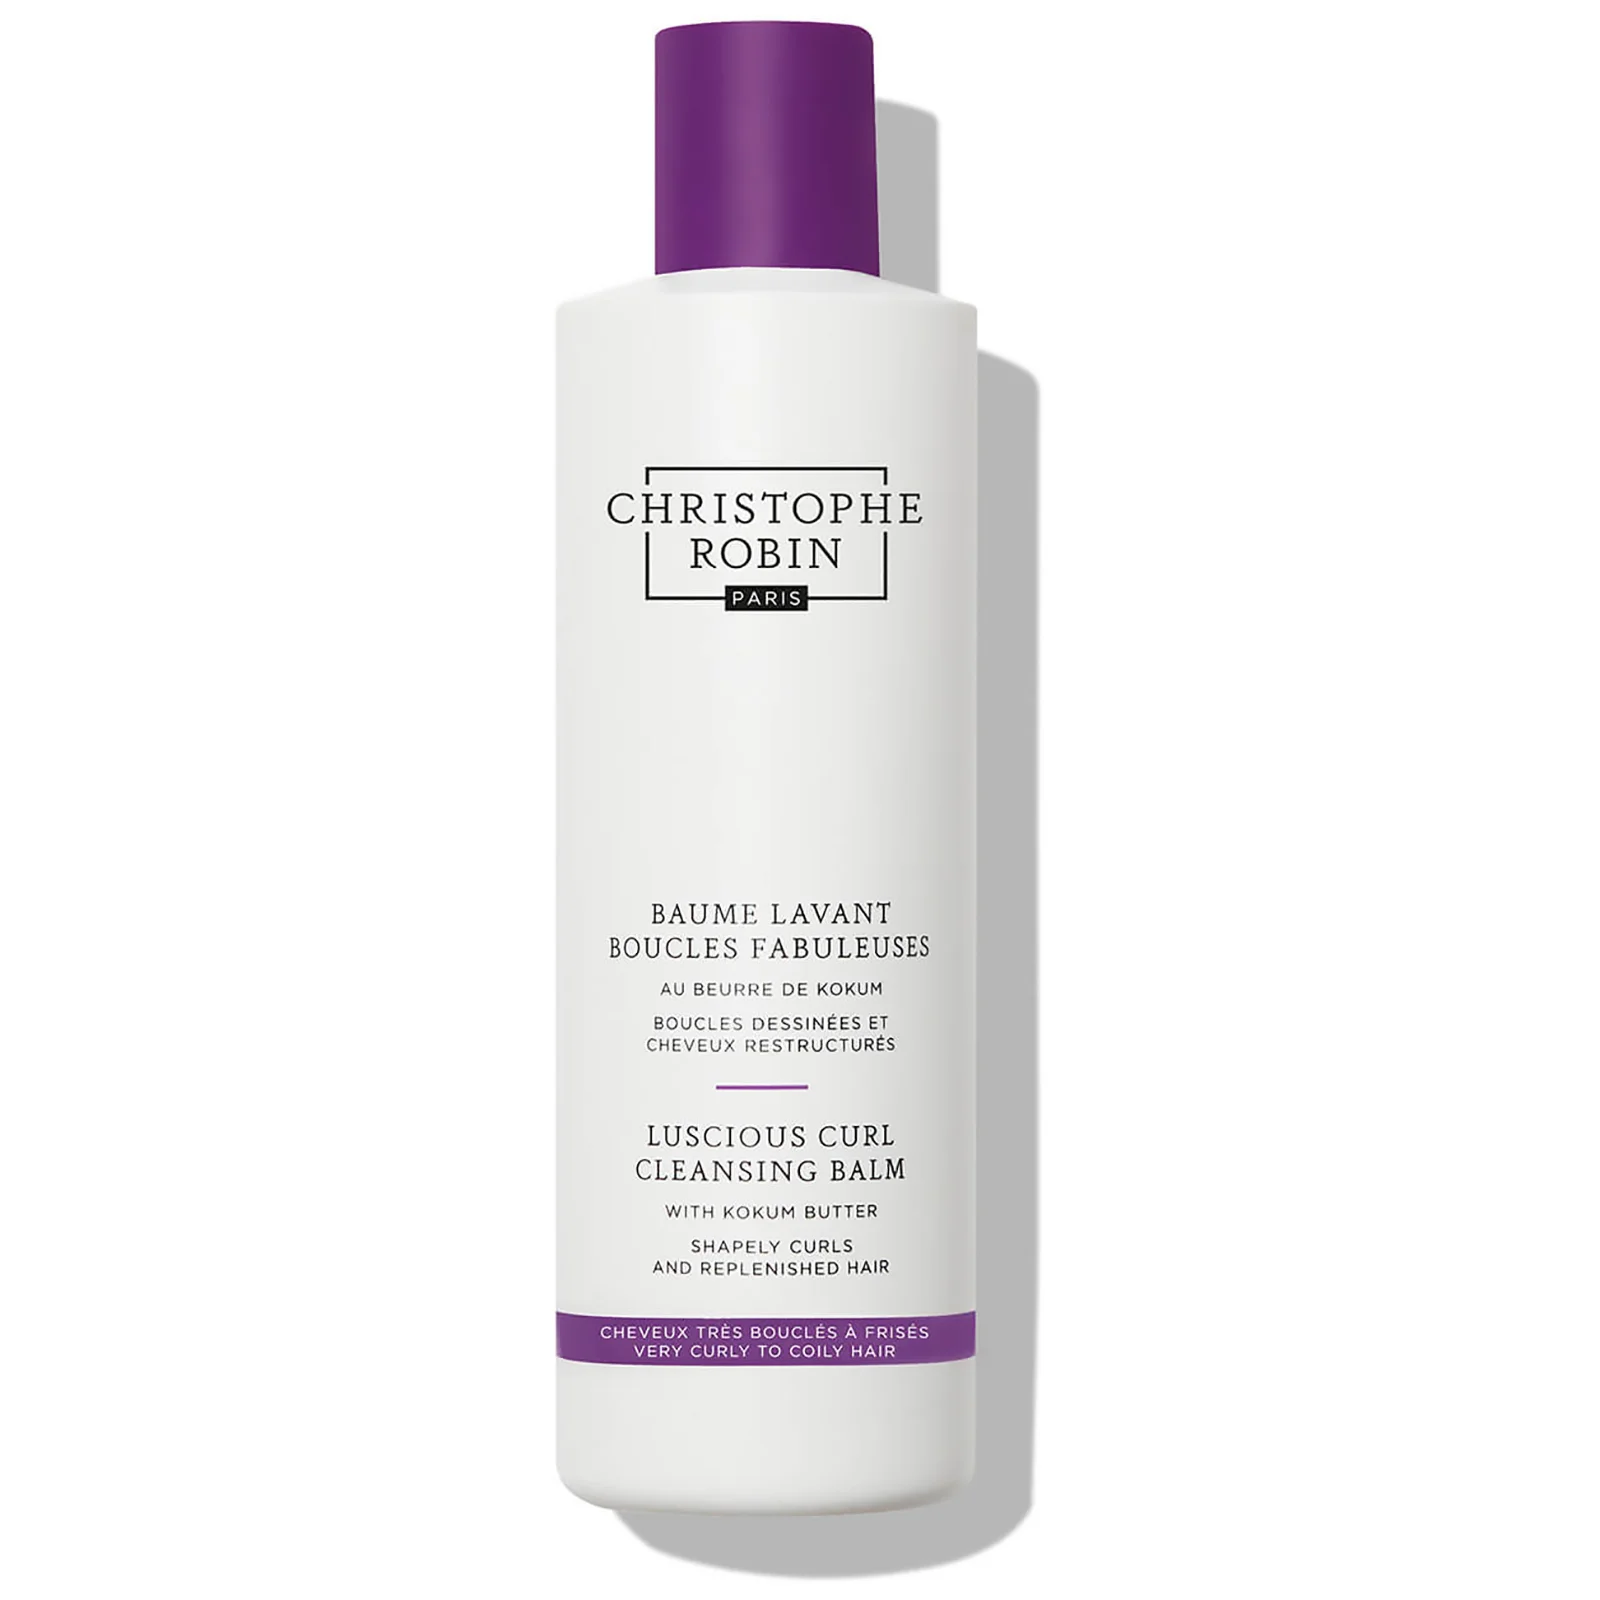 Christophe Robin Luscious Curl Cleansing Balm with Kokum Butter 250ml Image 1